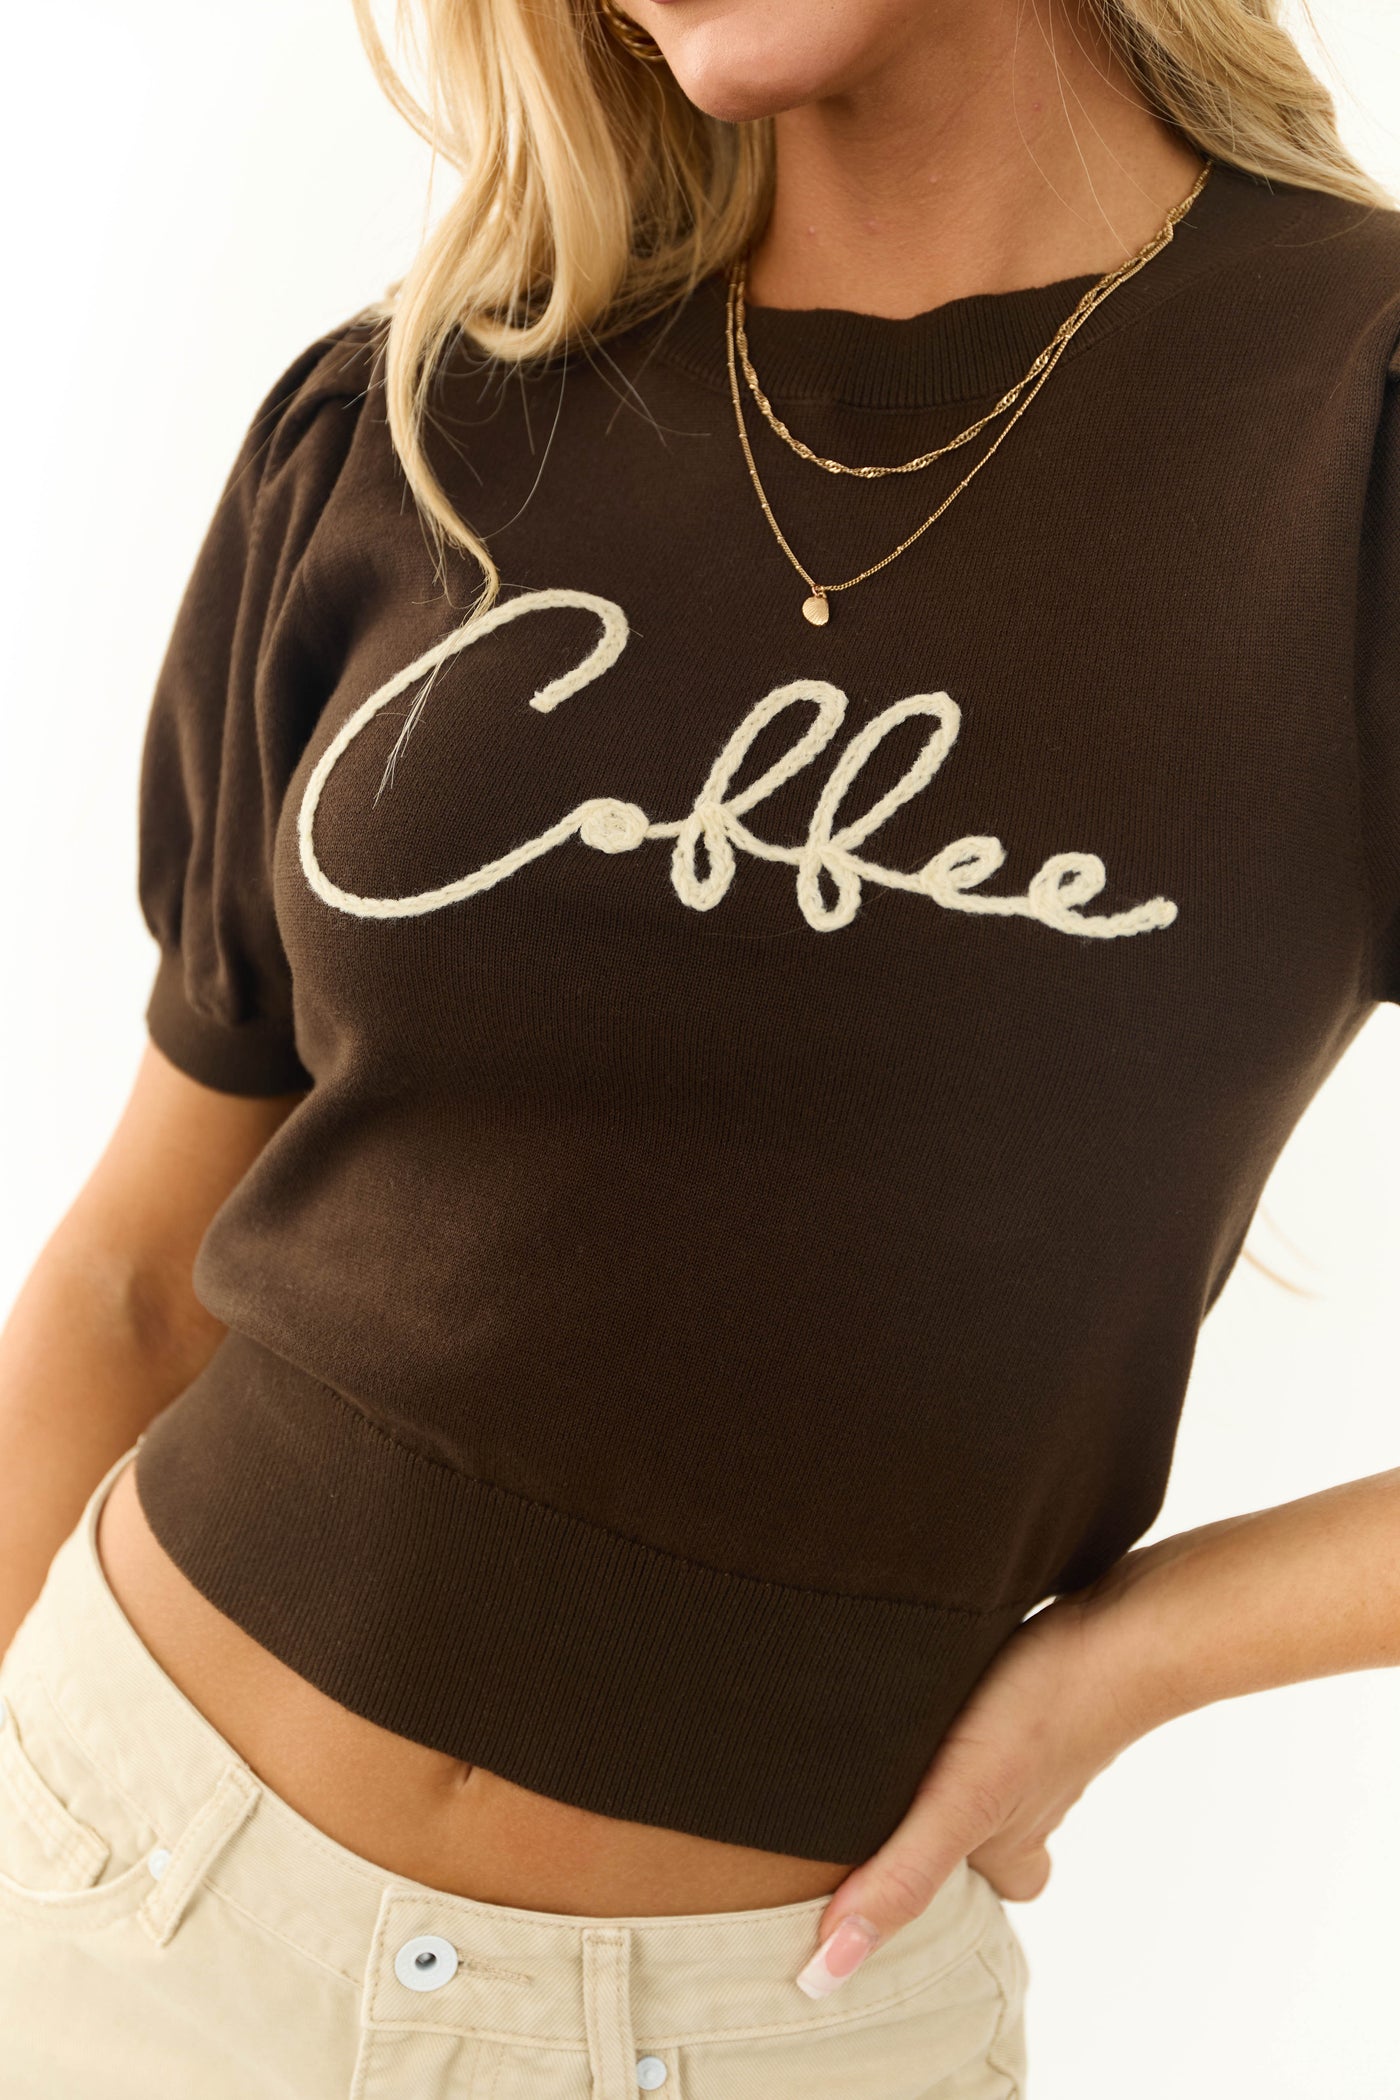 Cocoa 'Coffee' Embroidered Short Sleeve Sweater